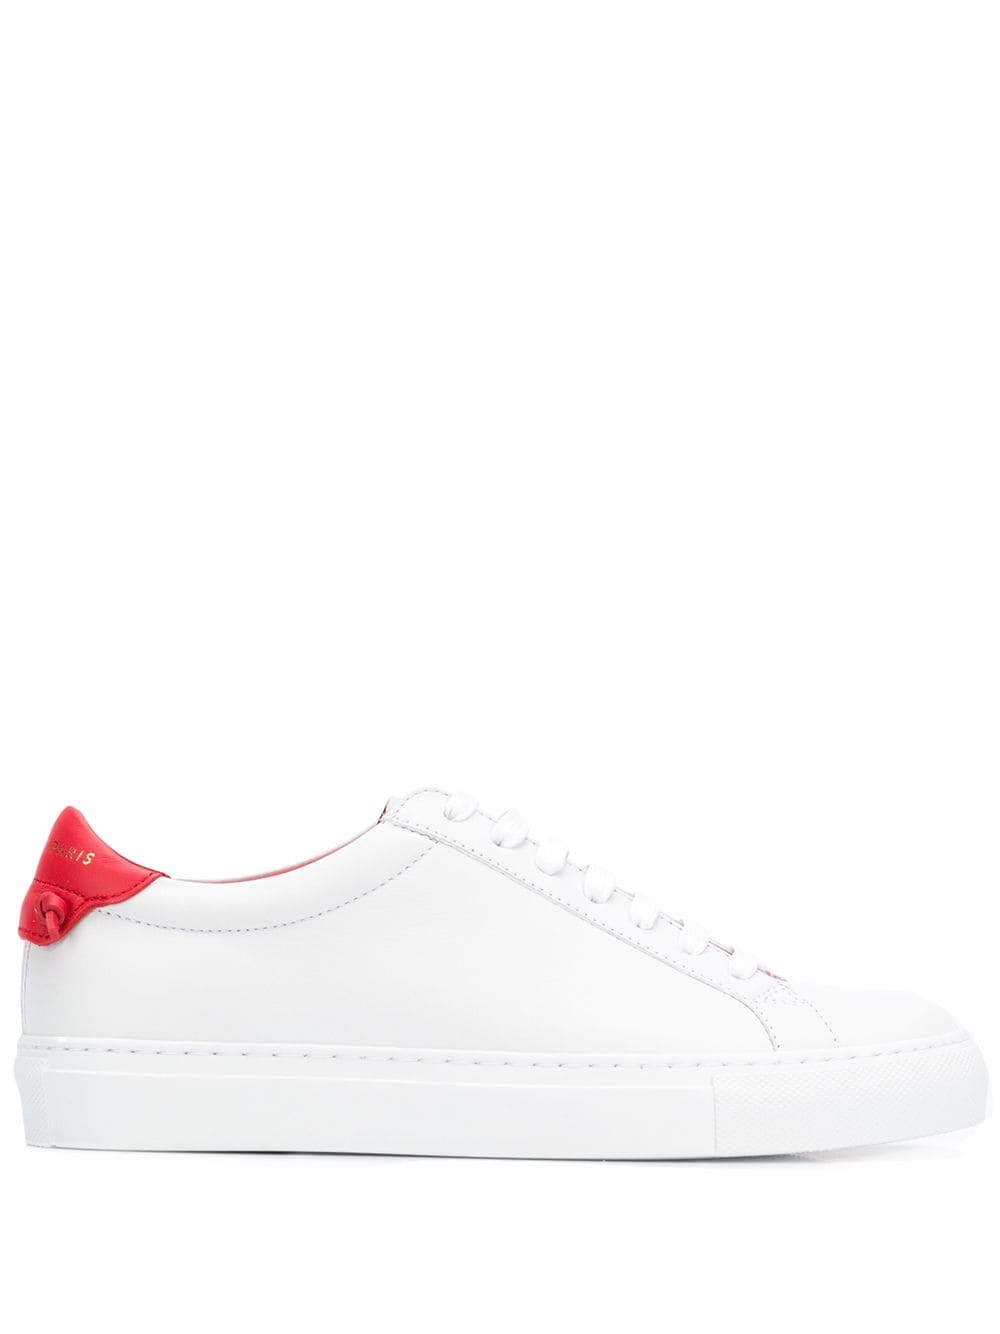 Leather Urban Street Sneakers дамски обувки Givenchy 848083731_35_5